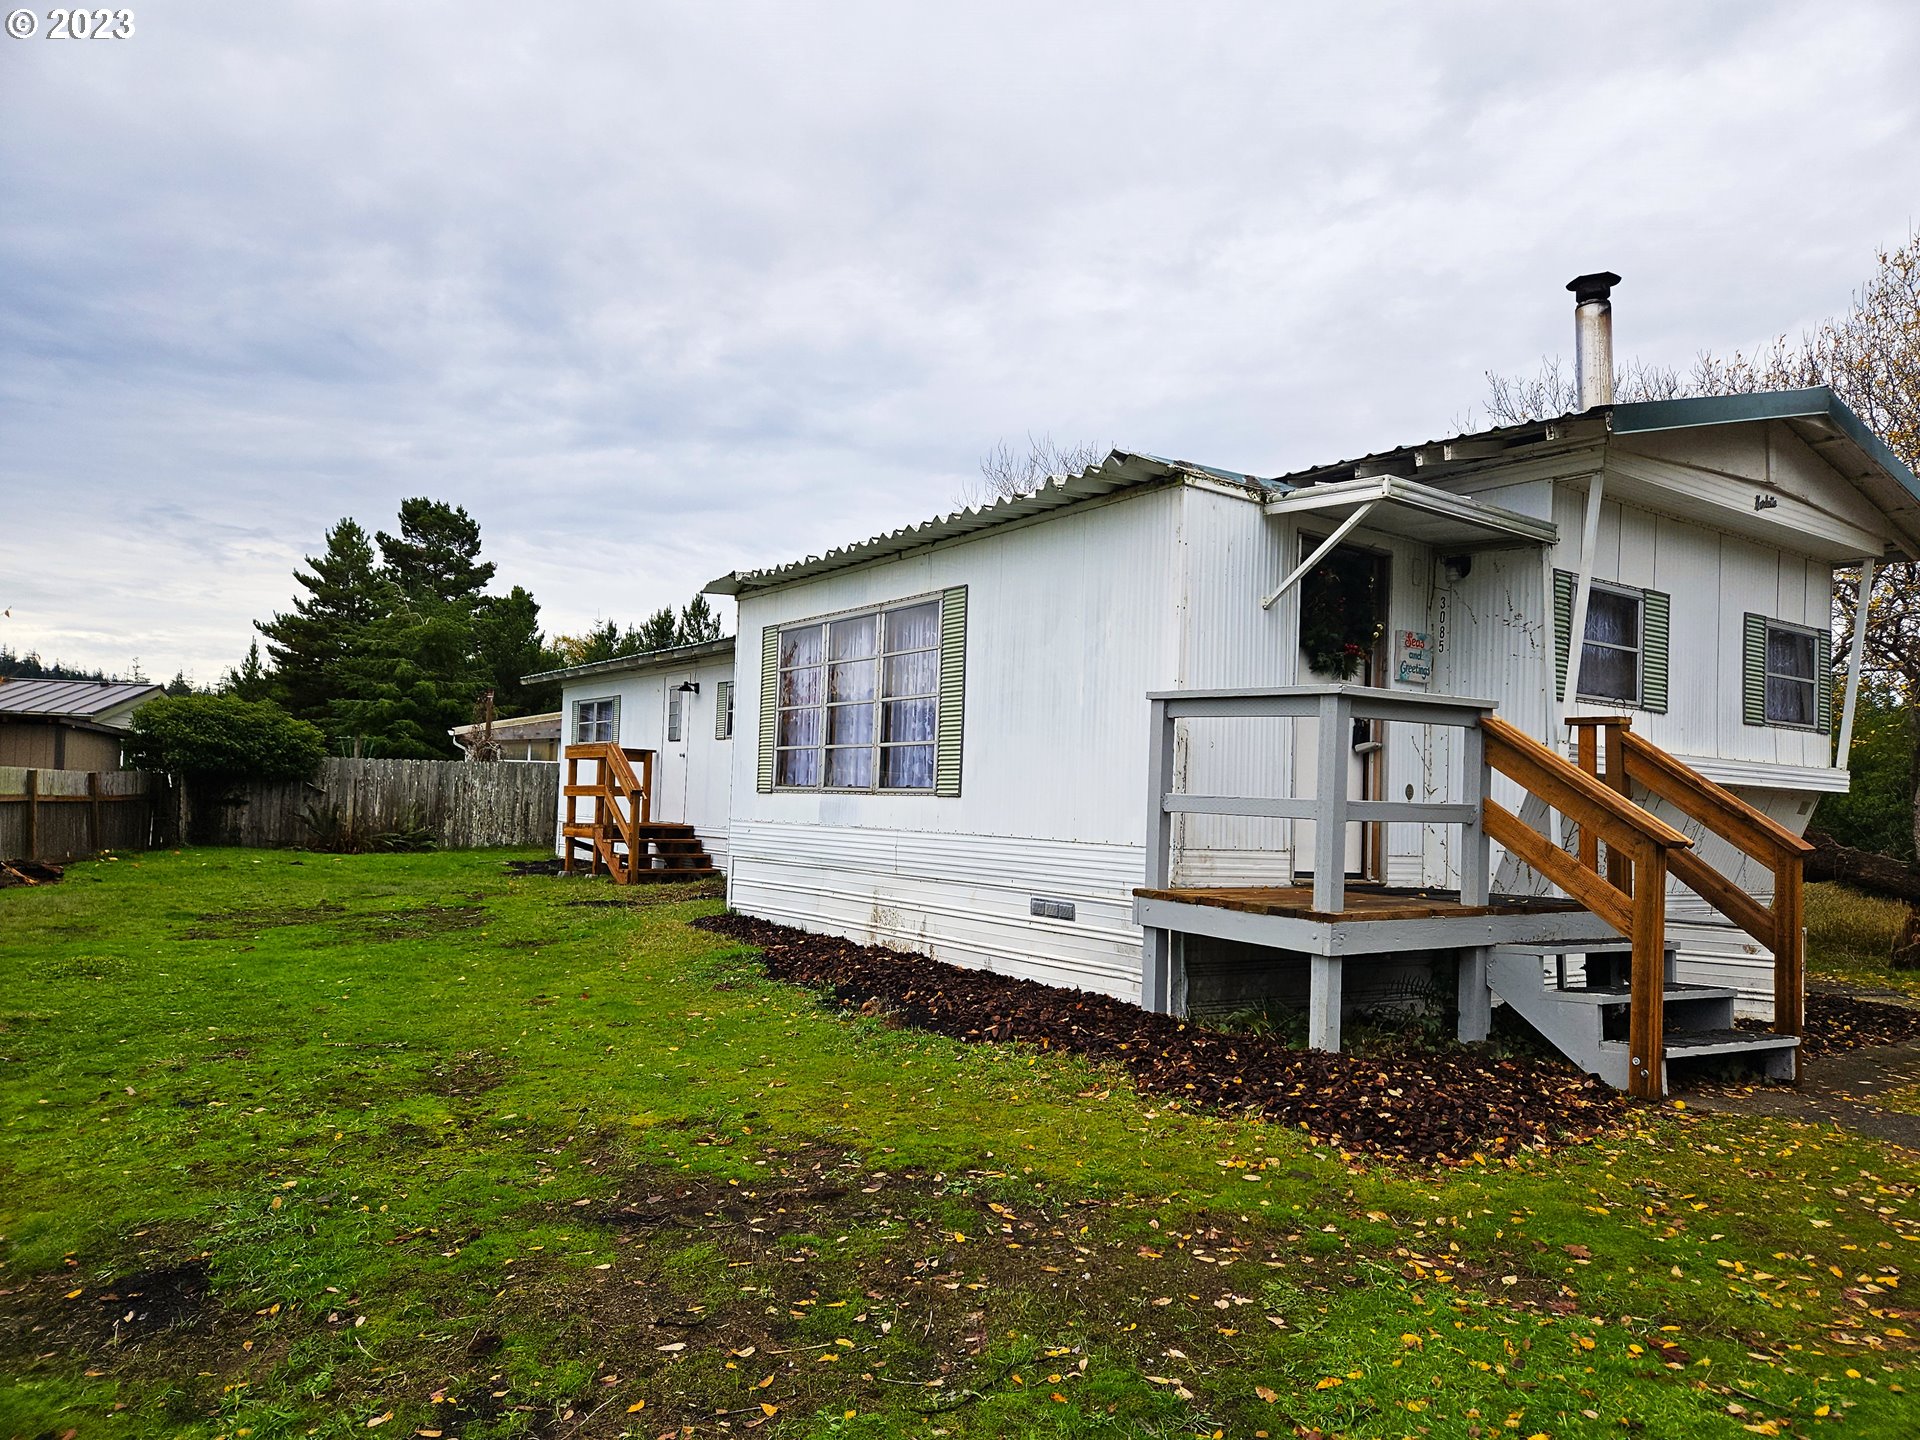 3085 KNOTT TER, Coos Bay, OR 